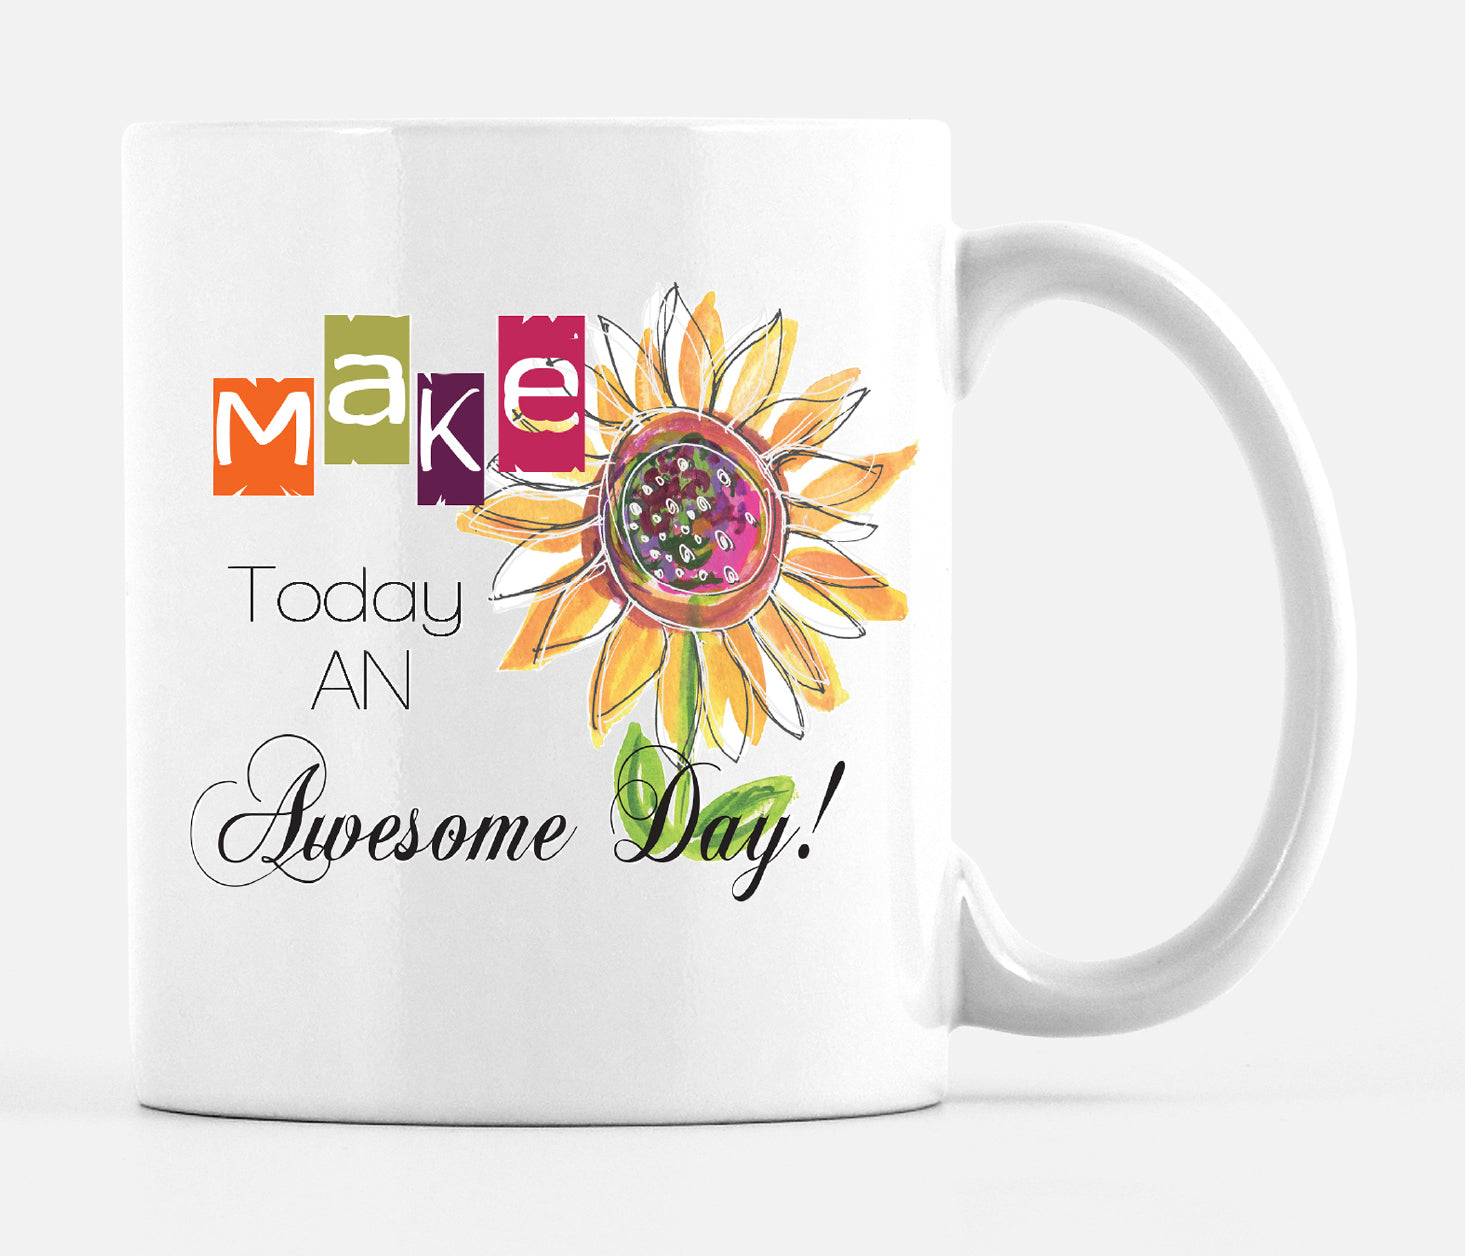 Make Today An Awesome Day!  Mug - Dreams After All